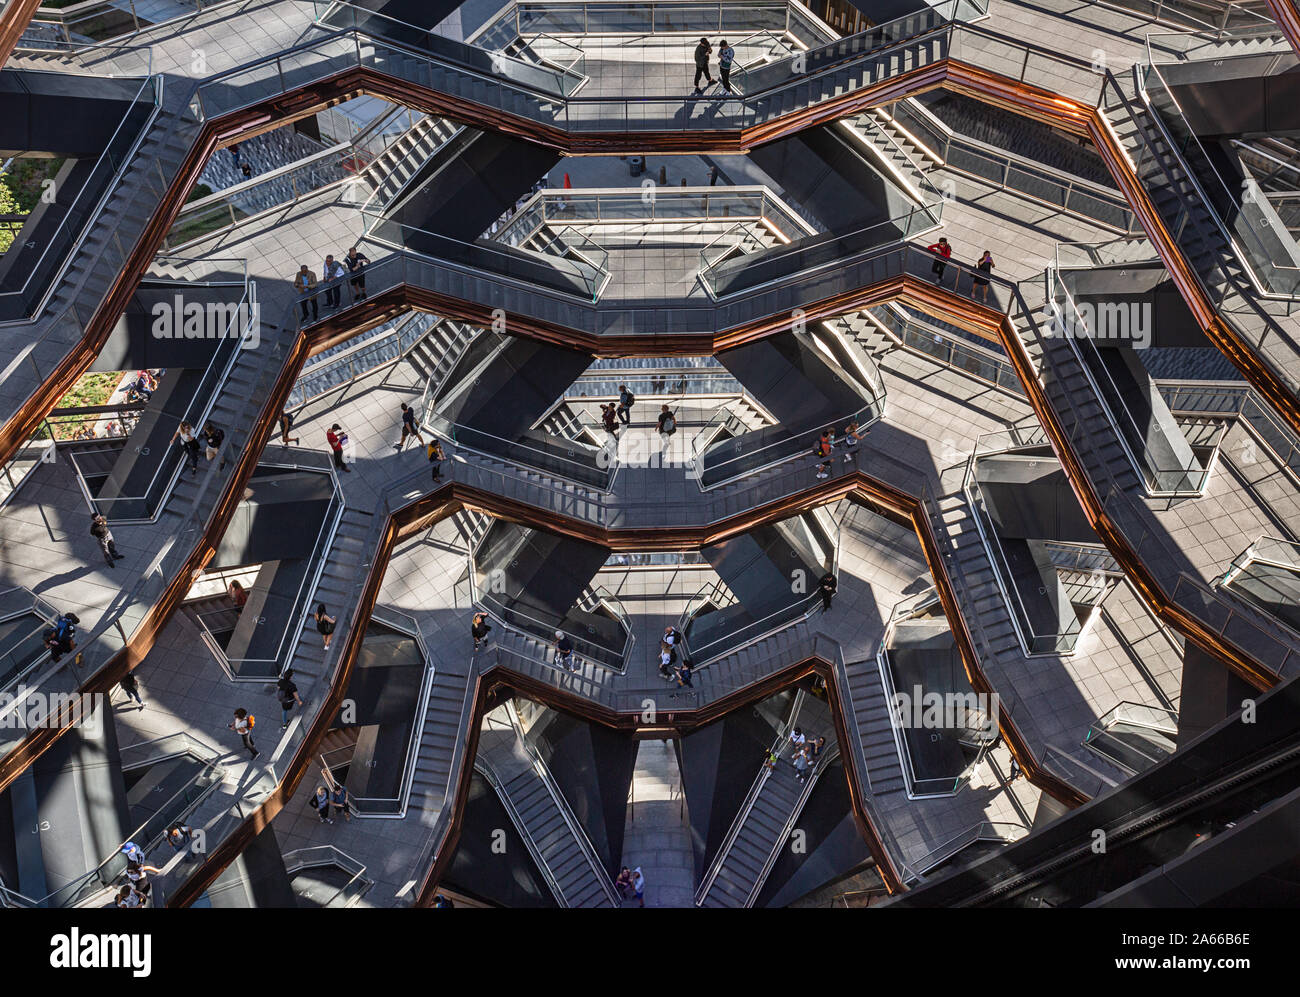 The Vessel at Hudson Yards in New York designed by Thomas Heatherwick. An interactive, spiral staircase artwork. Stock Photo